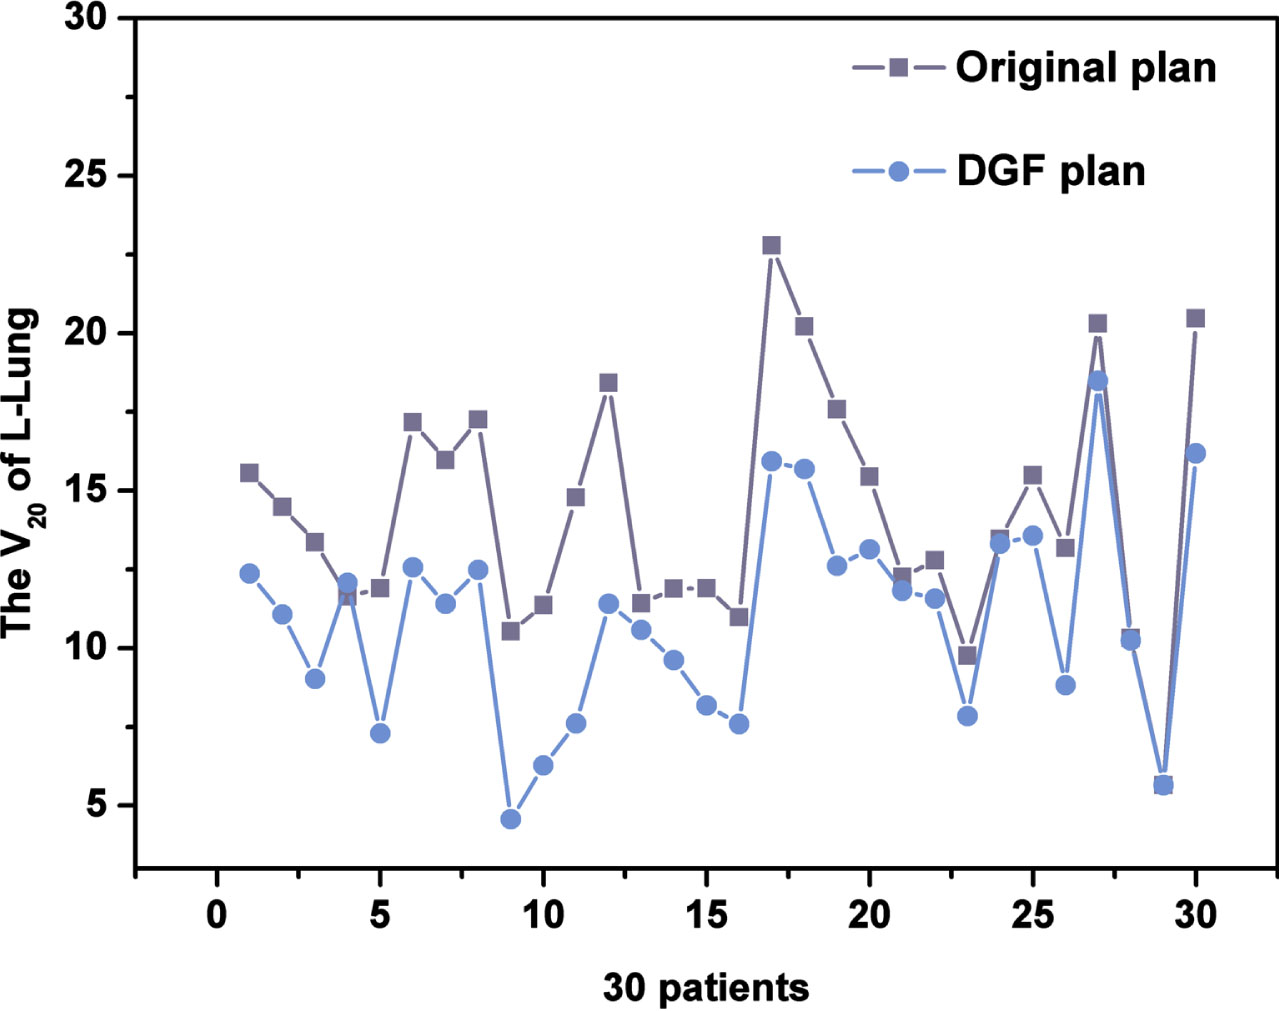 The V20 of Left lung between the original plan and the DGF plan in 30 patients.